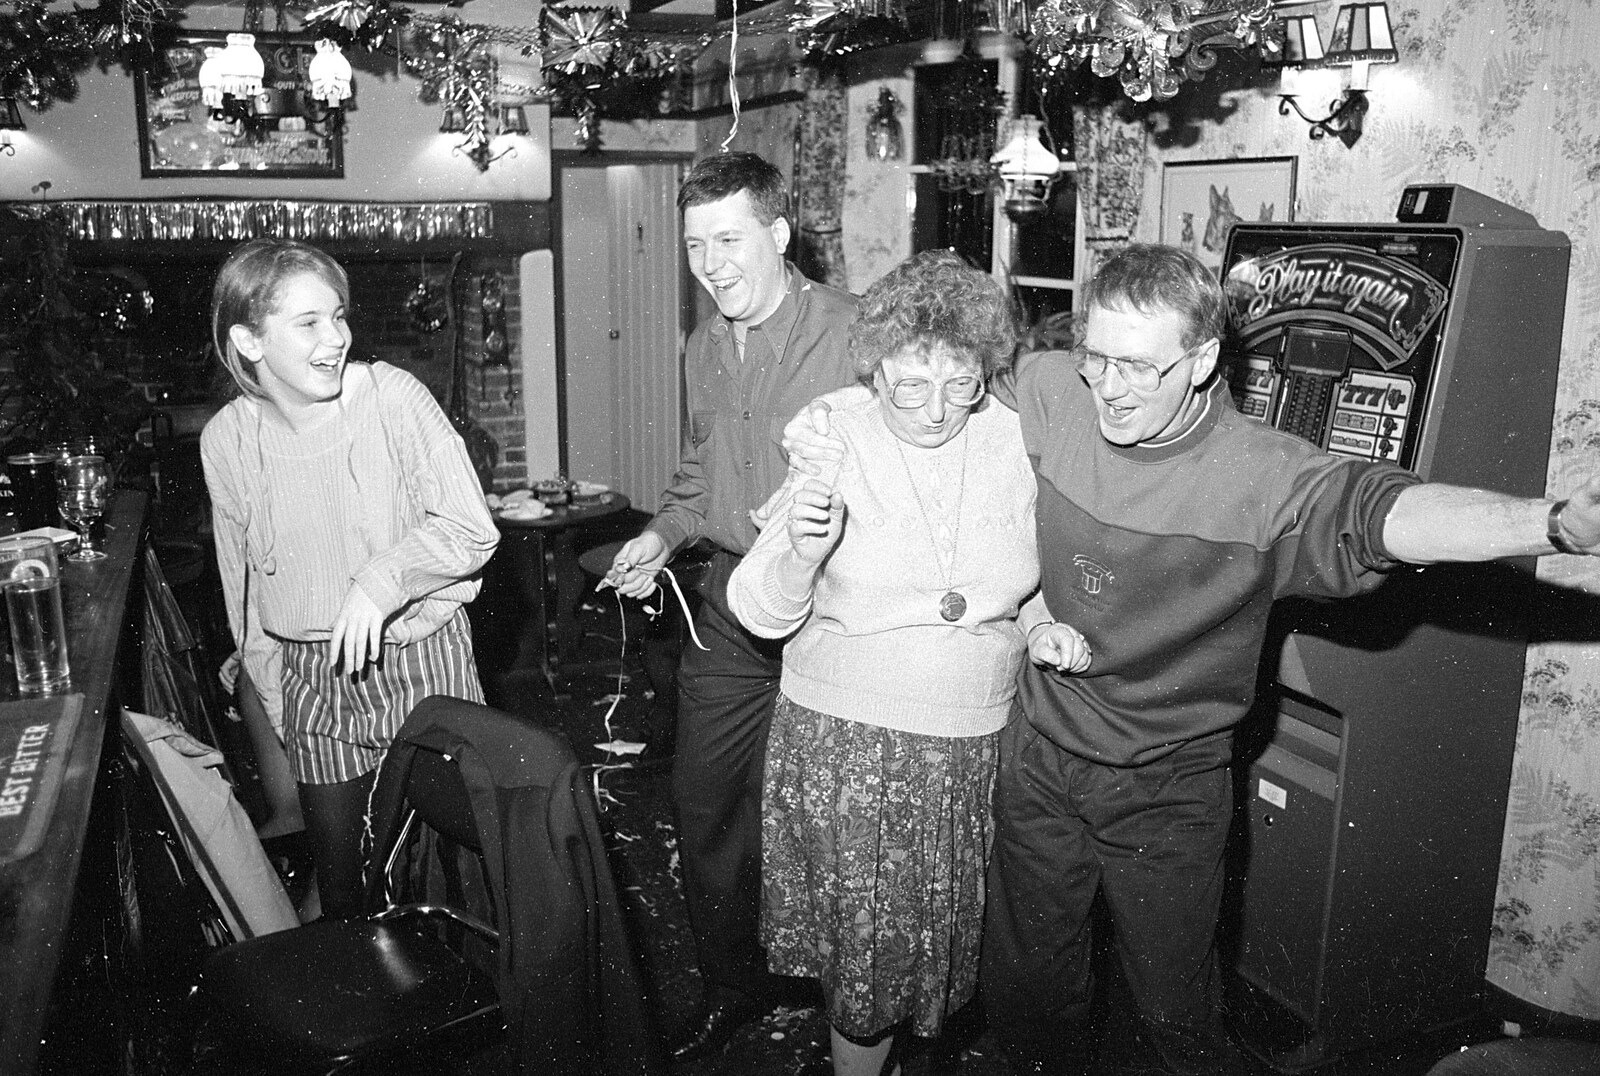 John Willy has a bop with Arline from New Year's Eve at the Swan Inn, Brome, Suffolk - 31st December 1992